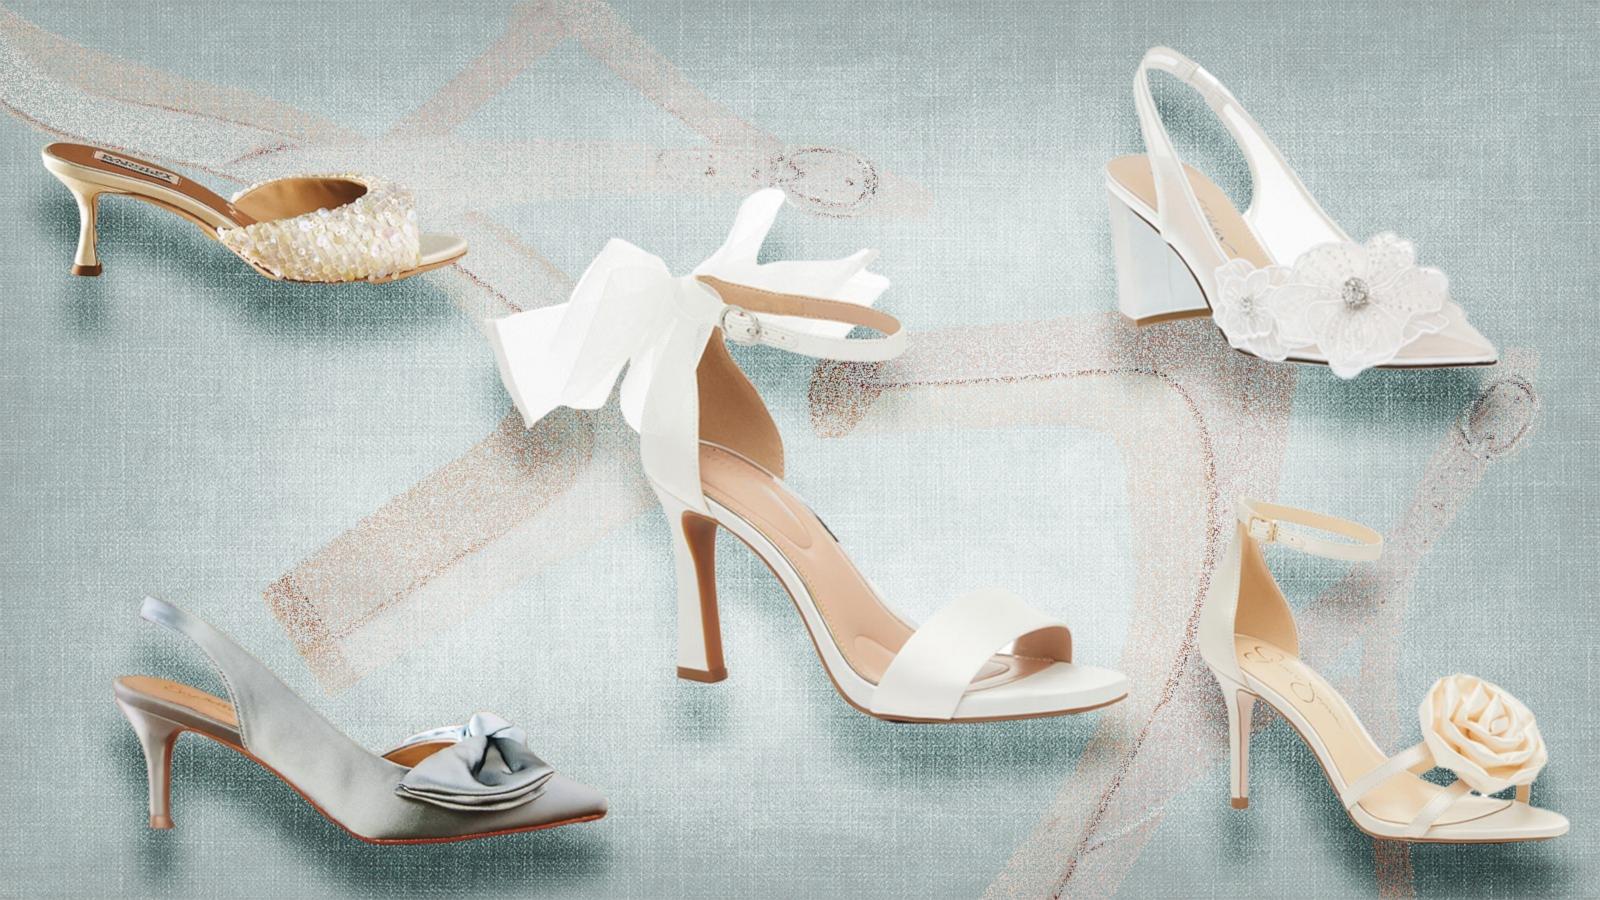 PHOTO: Top picks for stylish bridal shoes